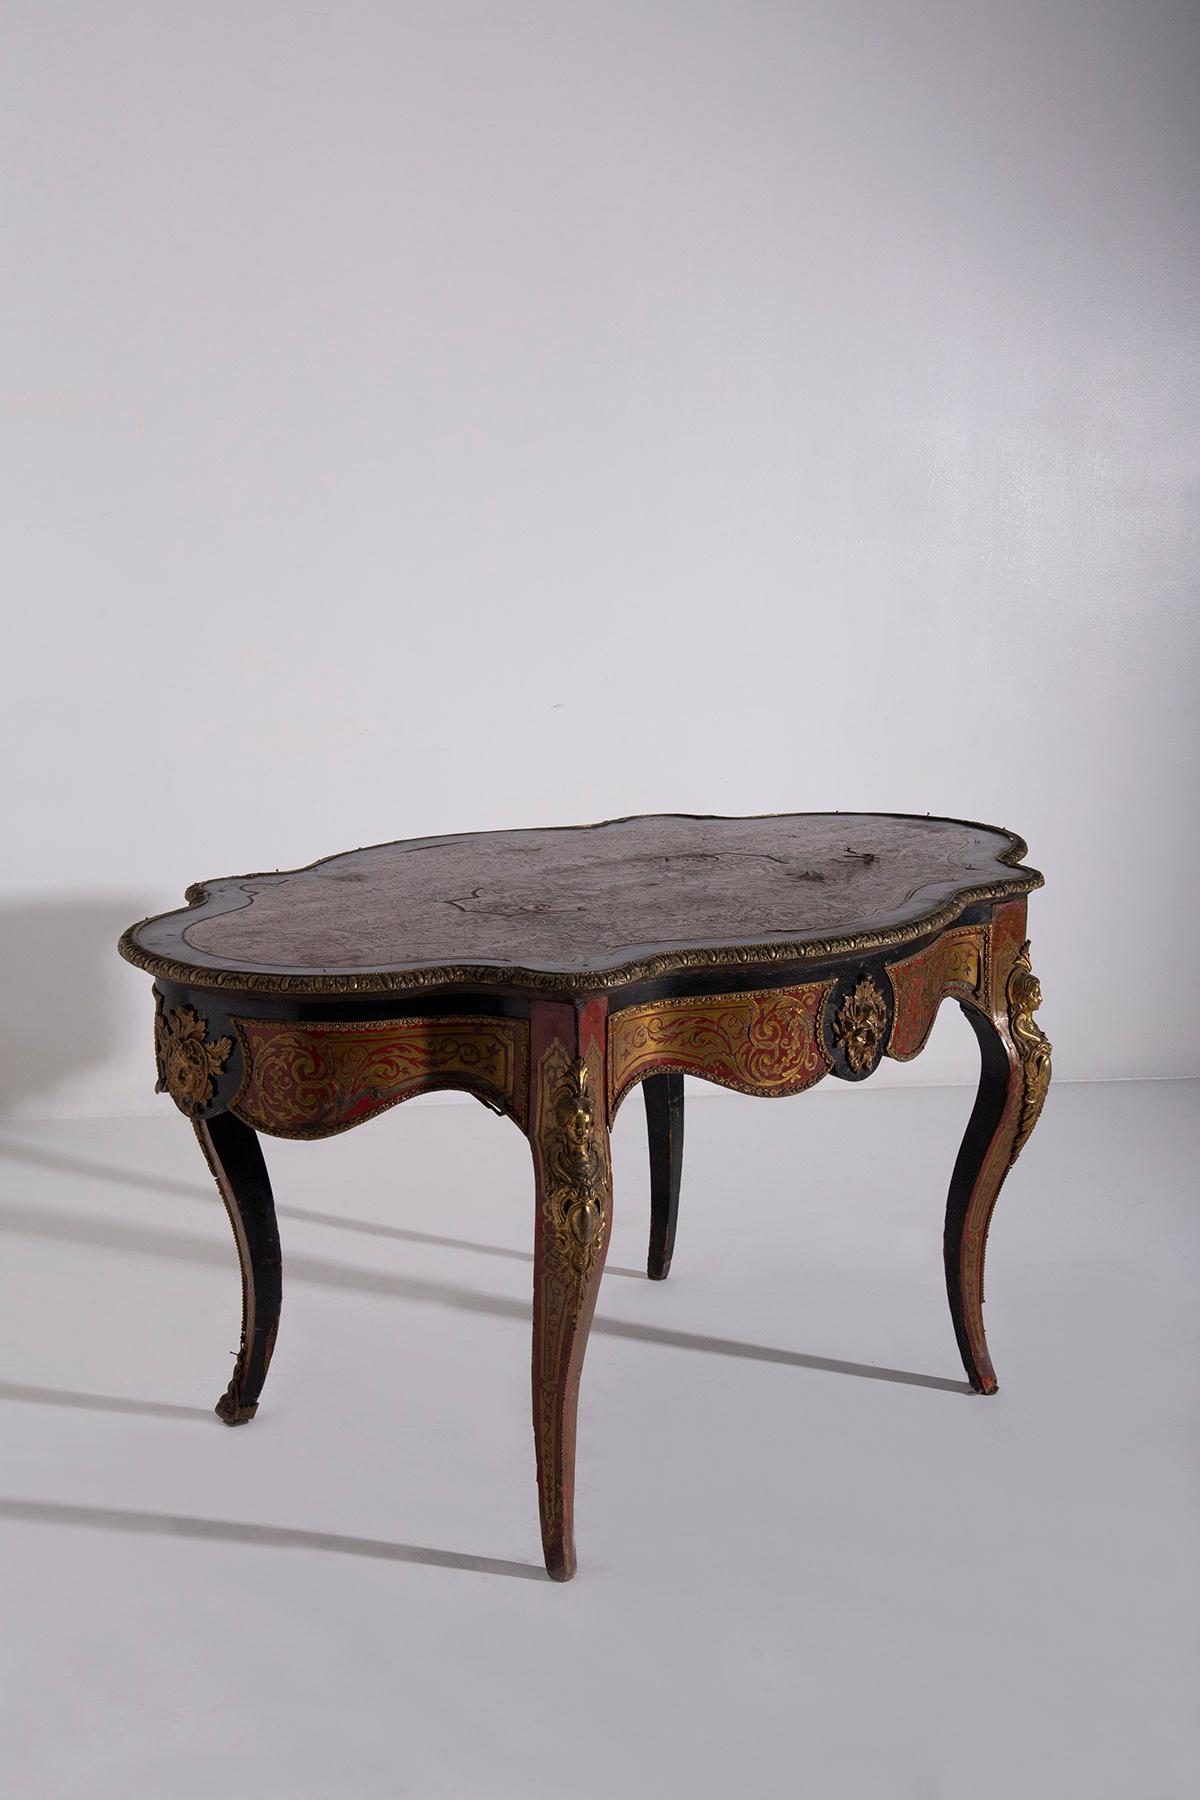 Behold the exquisite beauty of an antique Boulle-style desk from the late 1800s, a true masterpiece that once graced the era of Napoleon III. This desk is not just a piece of furniture; it is a work of art that takes you on a journey through time,